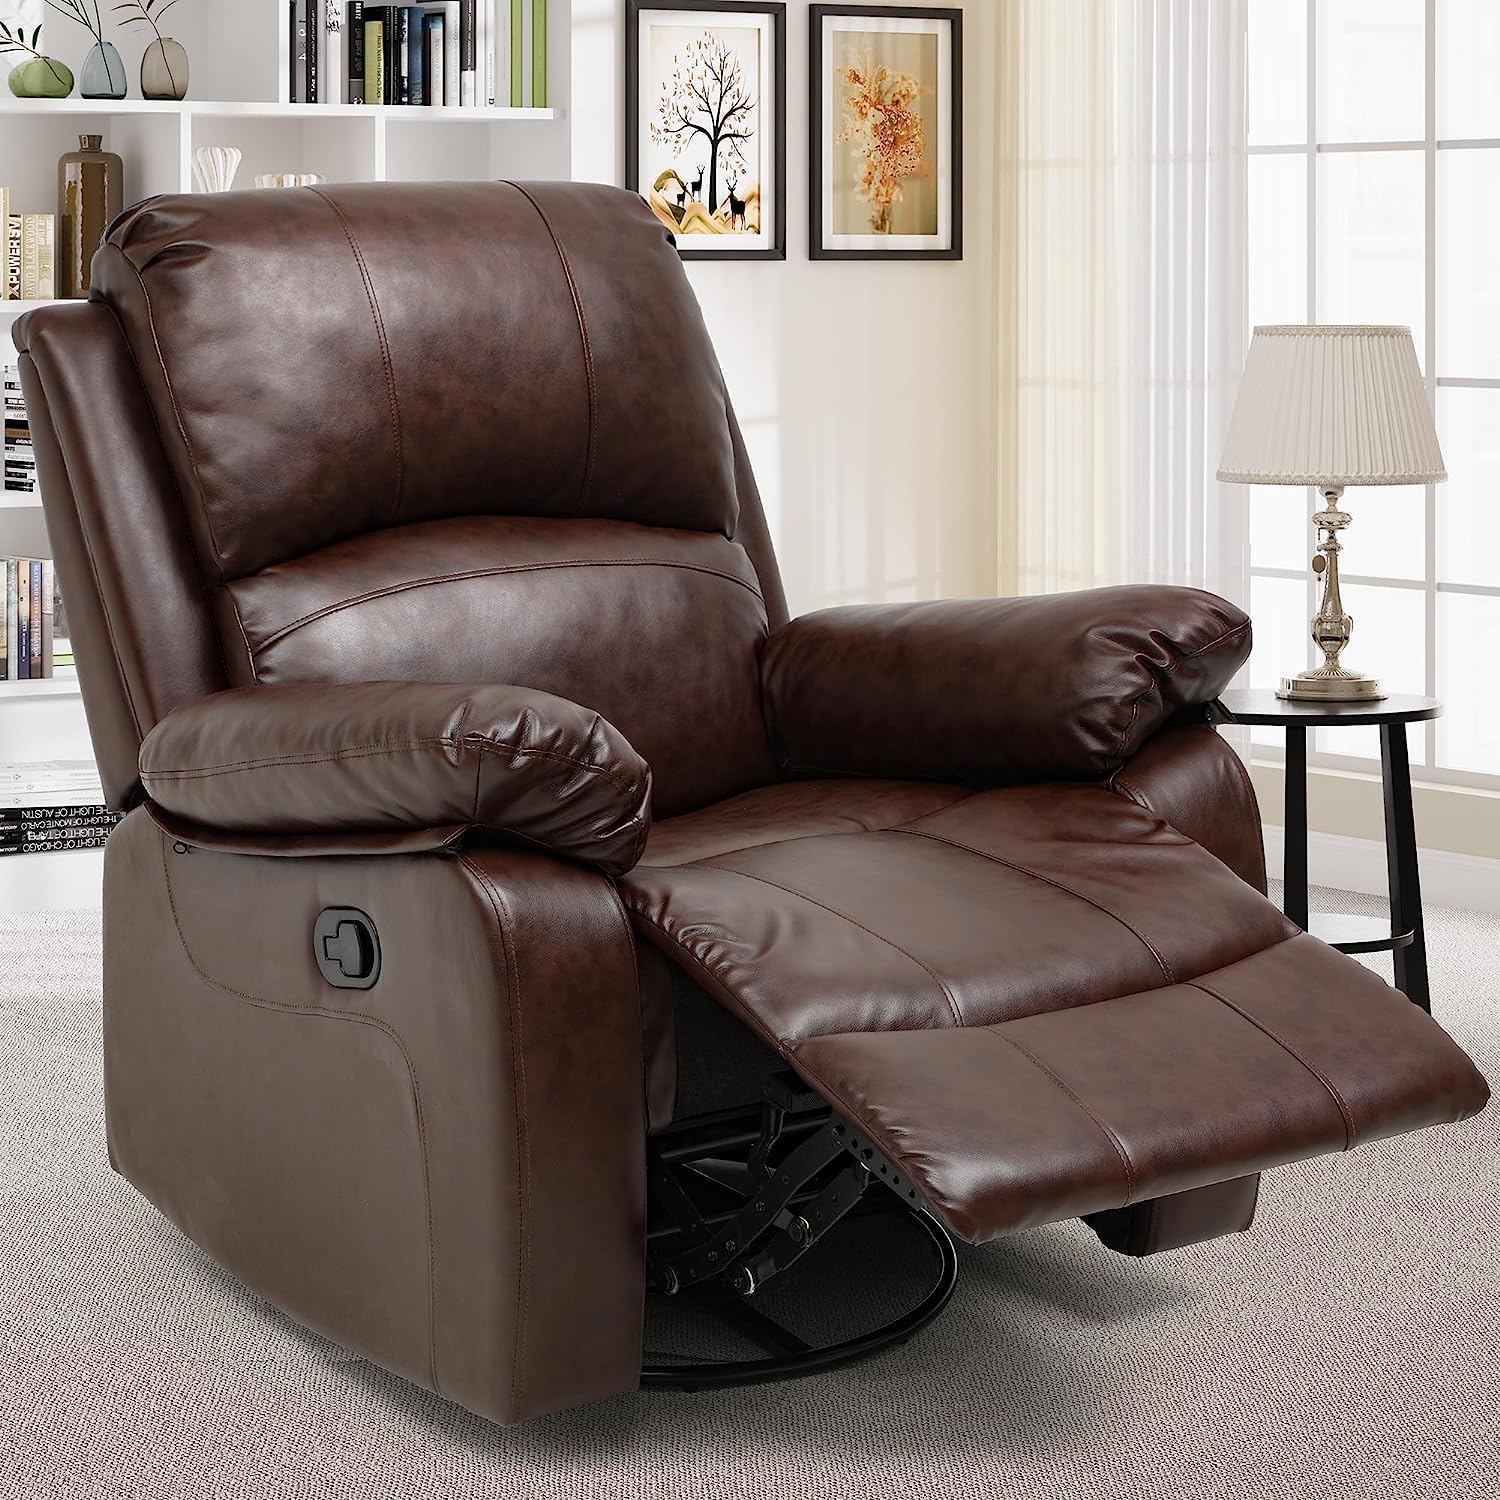 YITAHOME Swivel Glider Rocker Recliner Chair for [...]